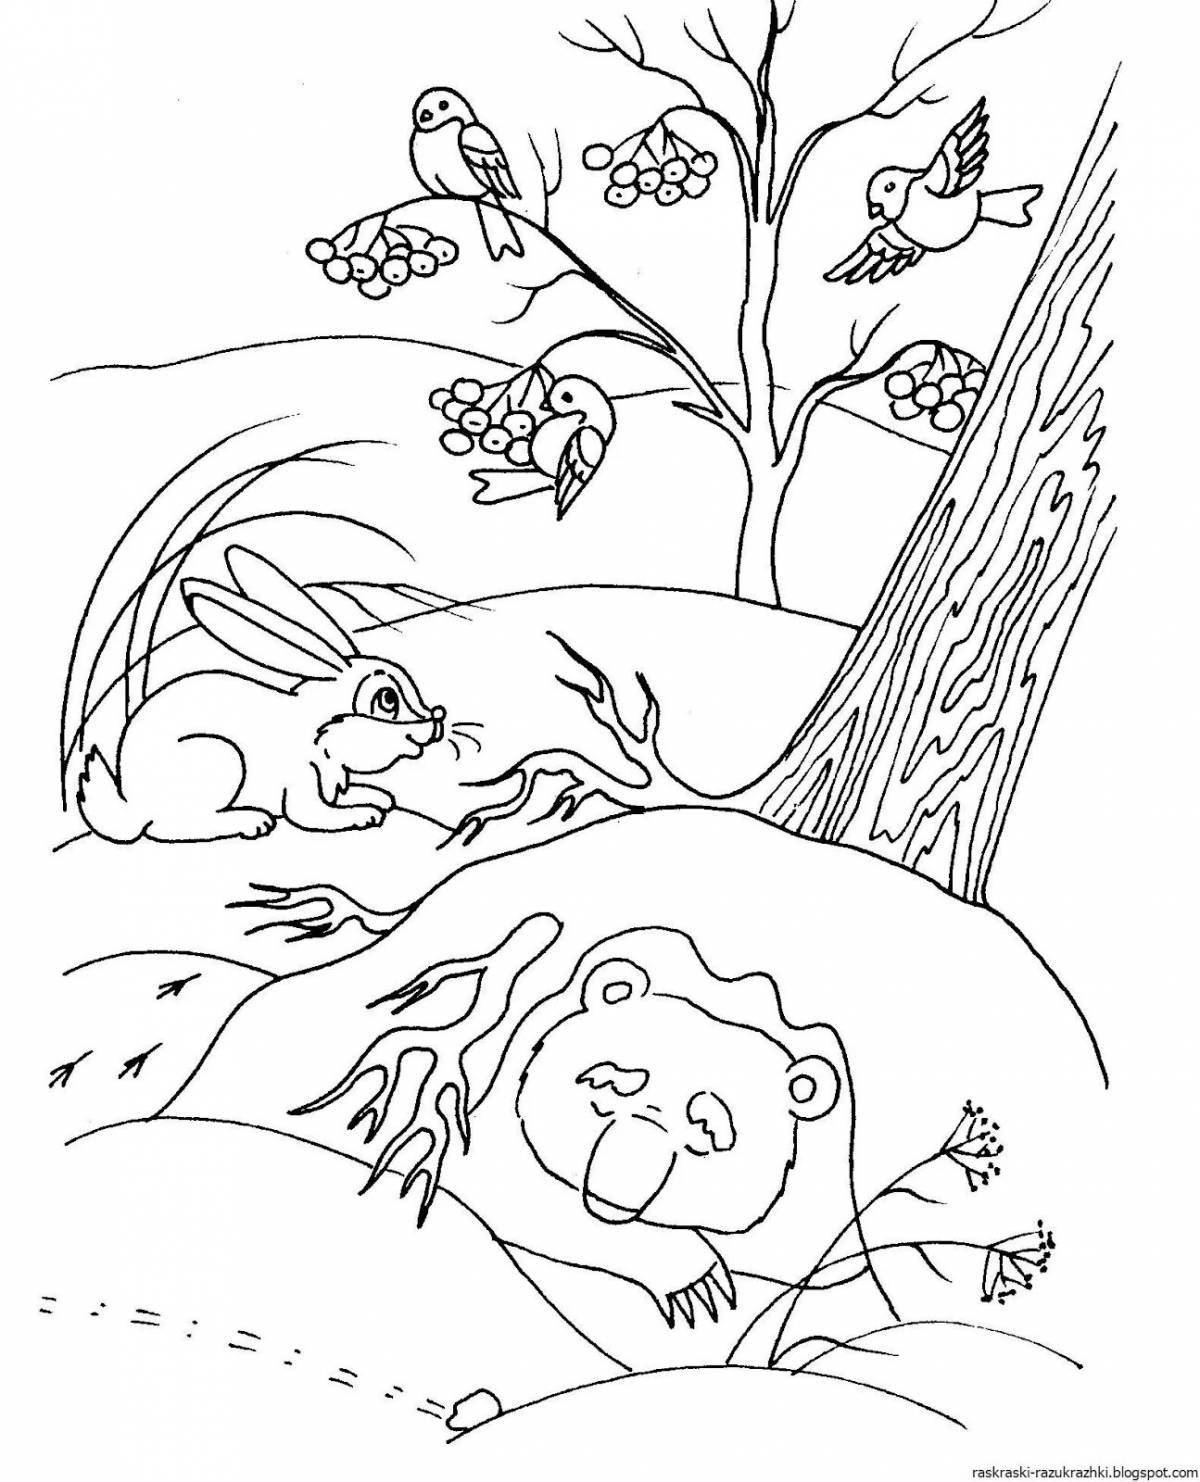 Coloring book shining winter plant for children